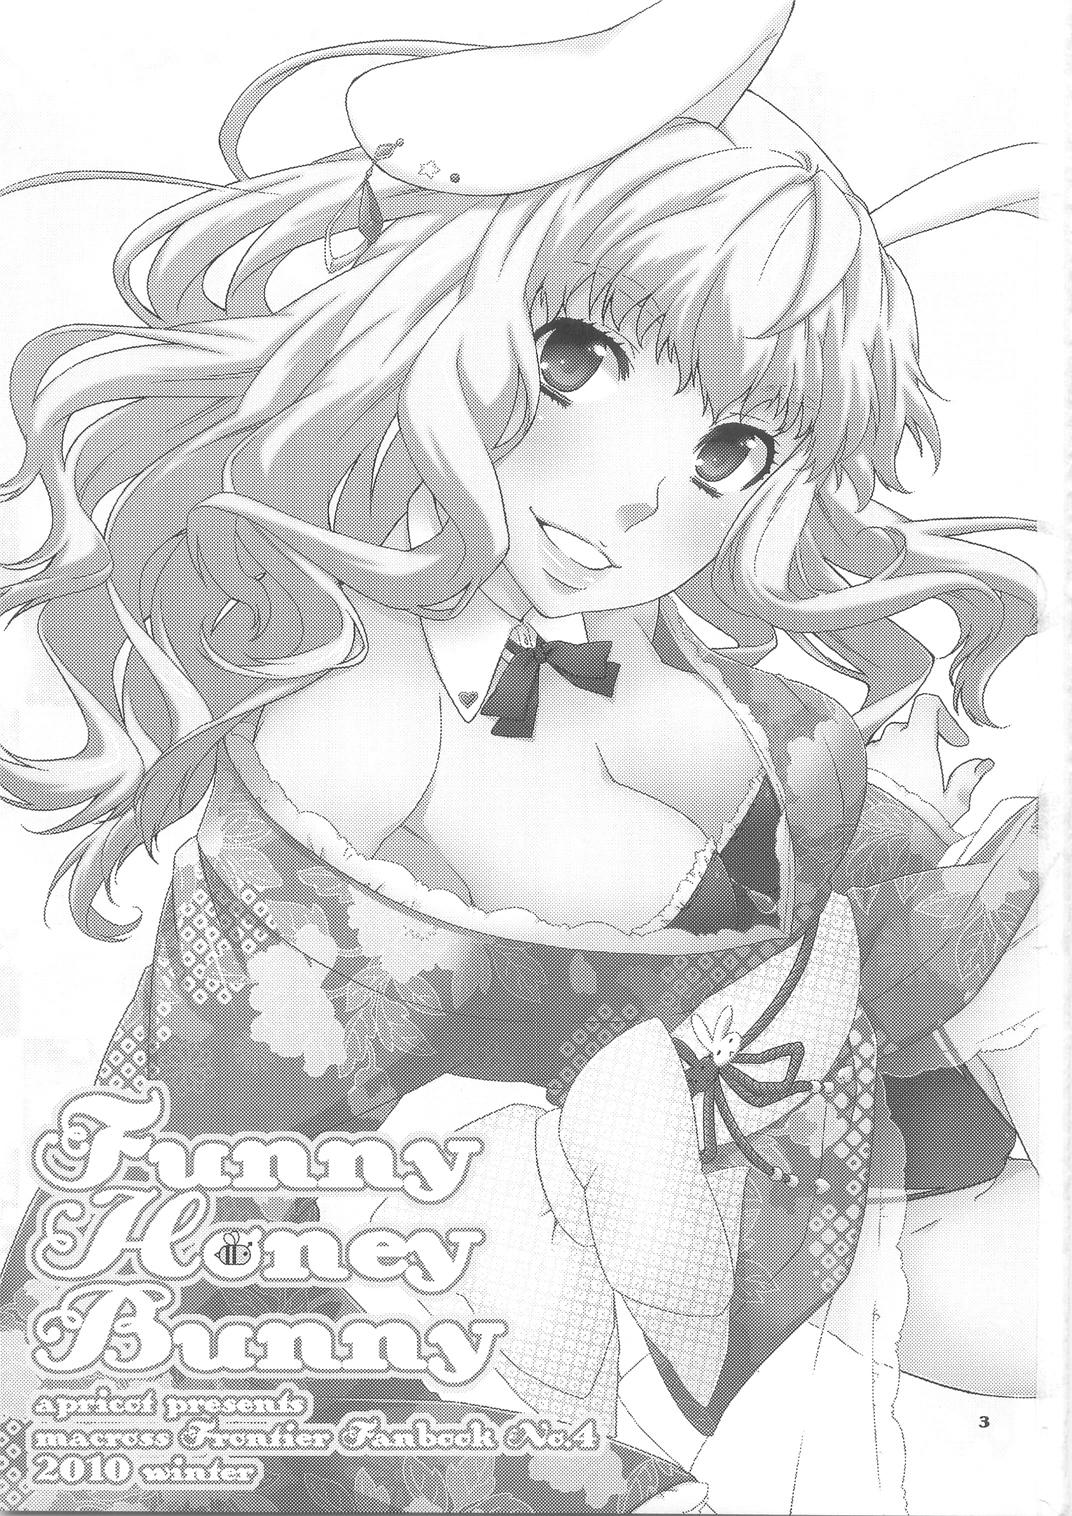 Banging Funny Honey Bunny - Macross frontier Tiny Tits Porn - Page 3